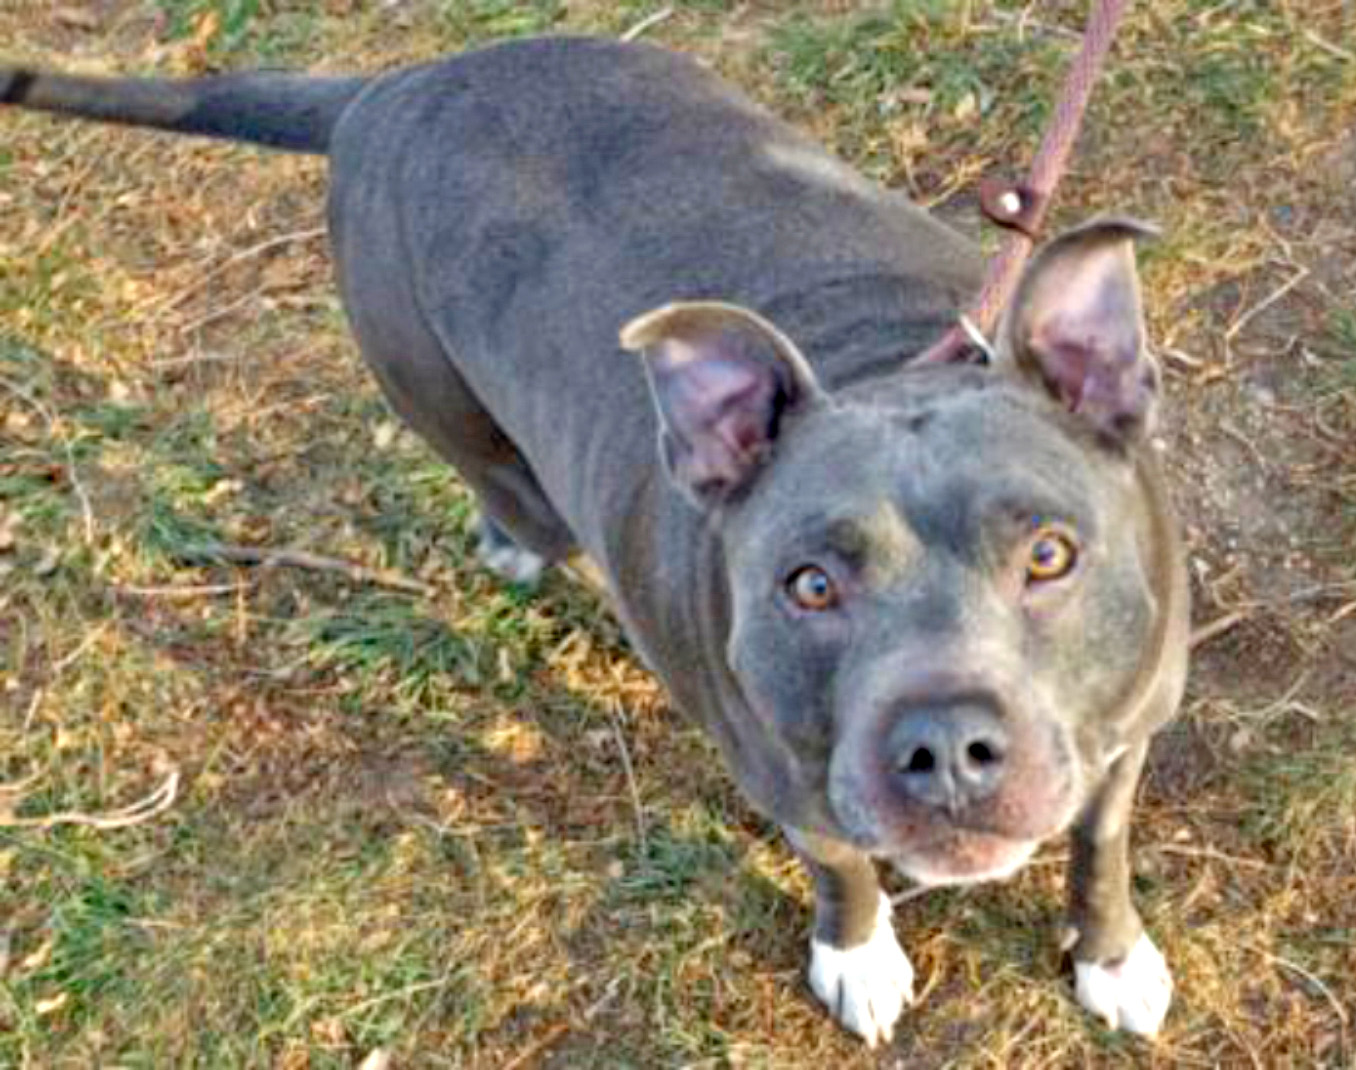 Humane Society – Pet of the Week: It’s so nice to meet you! My name is Will Scarlet and meeting new people makes me happy. I’m a 6-year-old pit bull and I’m a good boy that will do best with slow introductions to dogs already in your home. My quirk is that I’m a bit overweight, and I need a family to help me stick to my exercise plan to get my summer bod ready. I would love to be your daily walk buddy! My adoption is $200 and I come with a voucher for a veterinary exam, vaccinations, 30 days of pet health insurance and a microchip, and I am already neutered. Just ask for Will Scarlet (1614819). Humane Society: 719-473-1741, 610 Abbot Lane. Call for hours. www.hsppr.org.